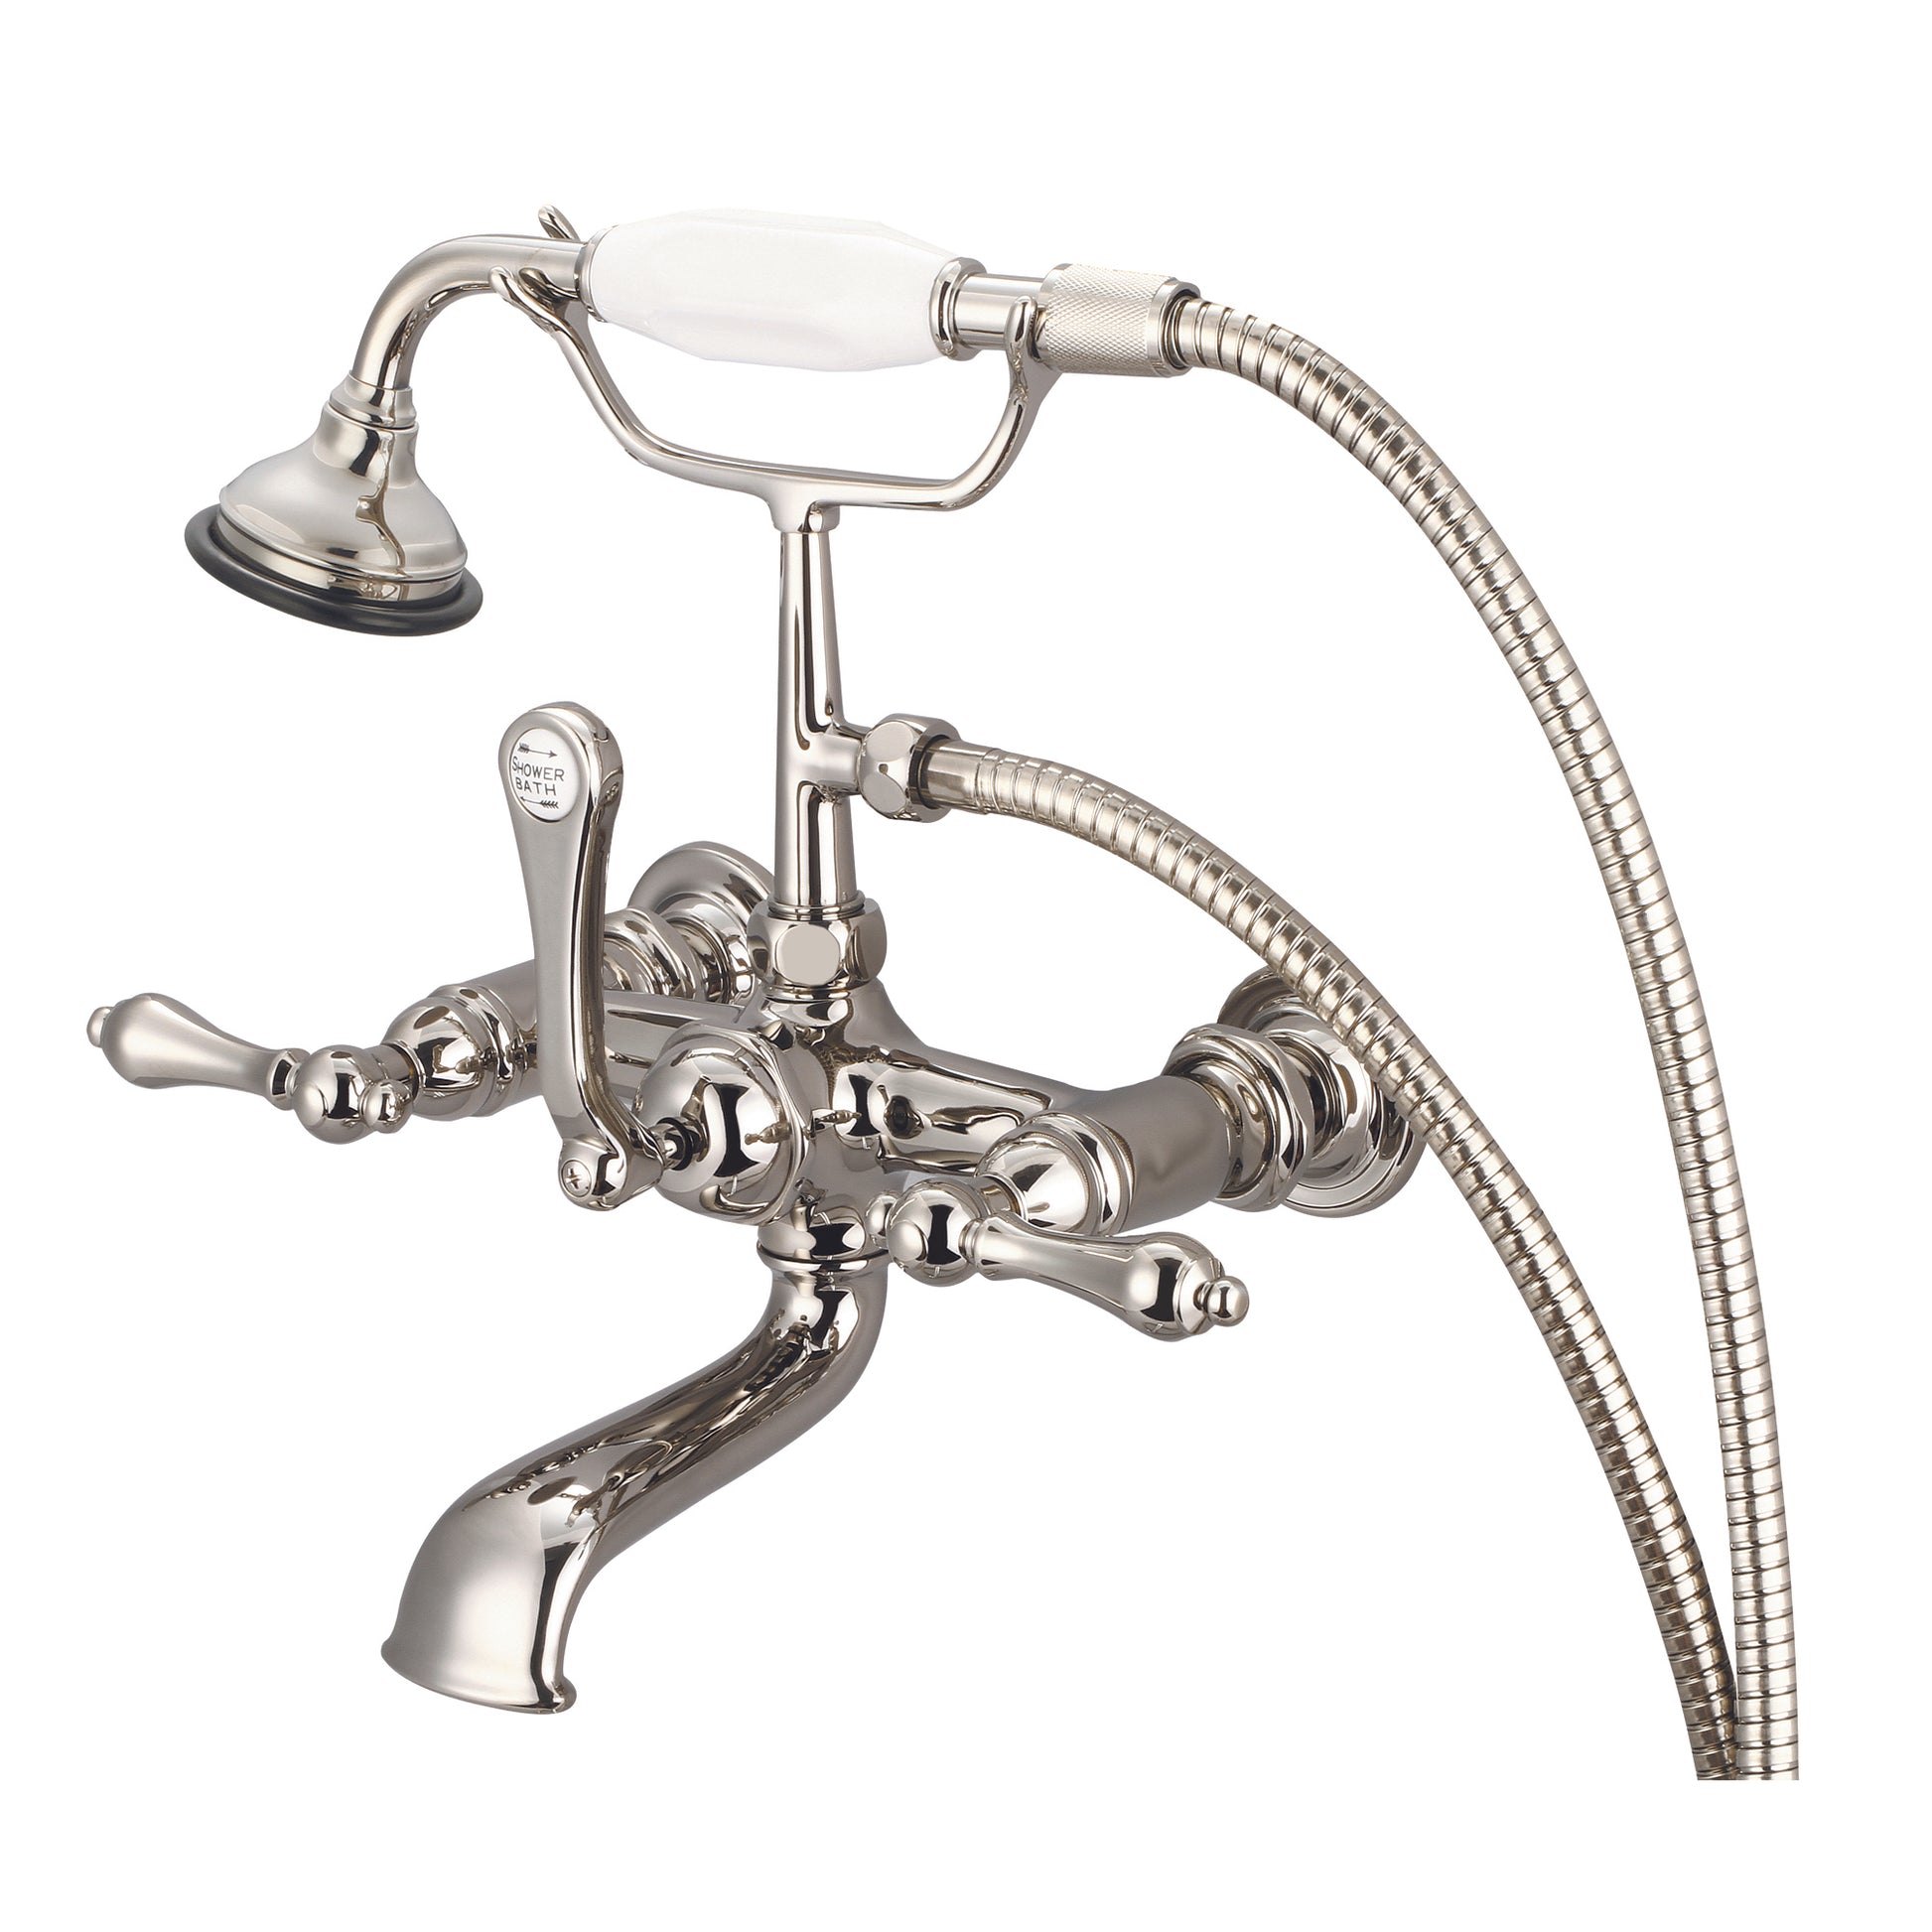 Vintage Classic 7" Spread Wall Mount Tub Faucet With Straight Wall Connector & Handheld Shower in Polished Nickel Finish, With Metal Lever Handles Without Labels